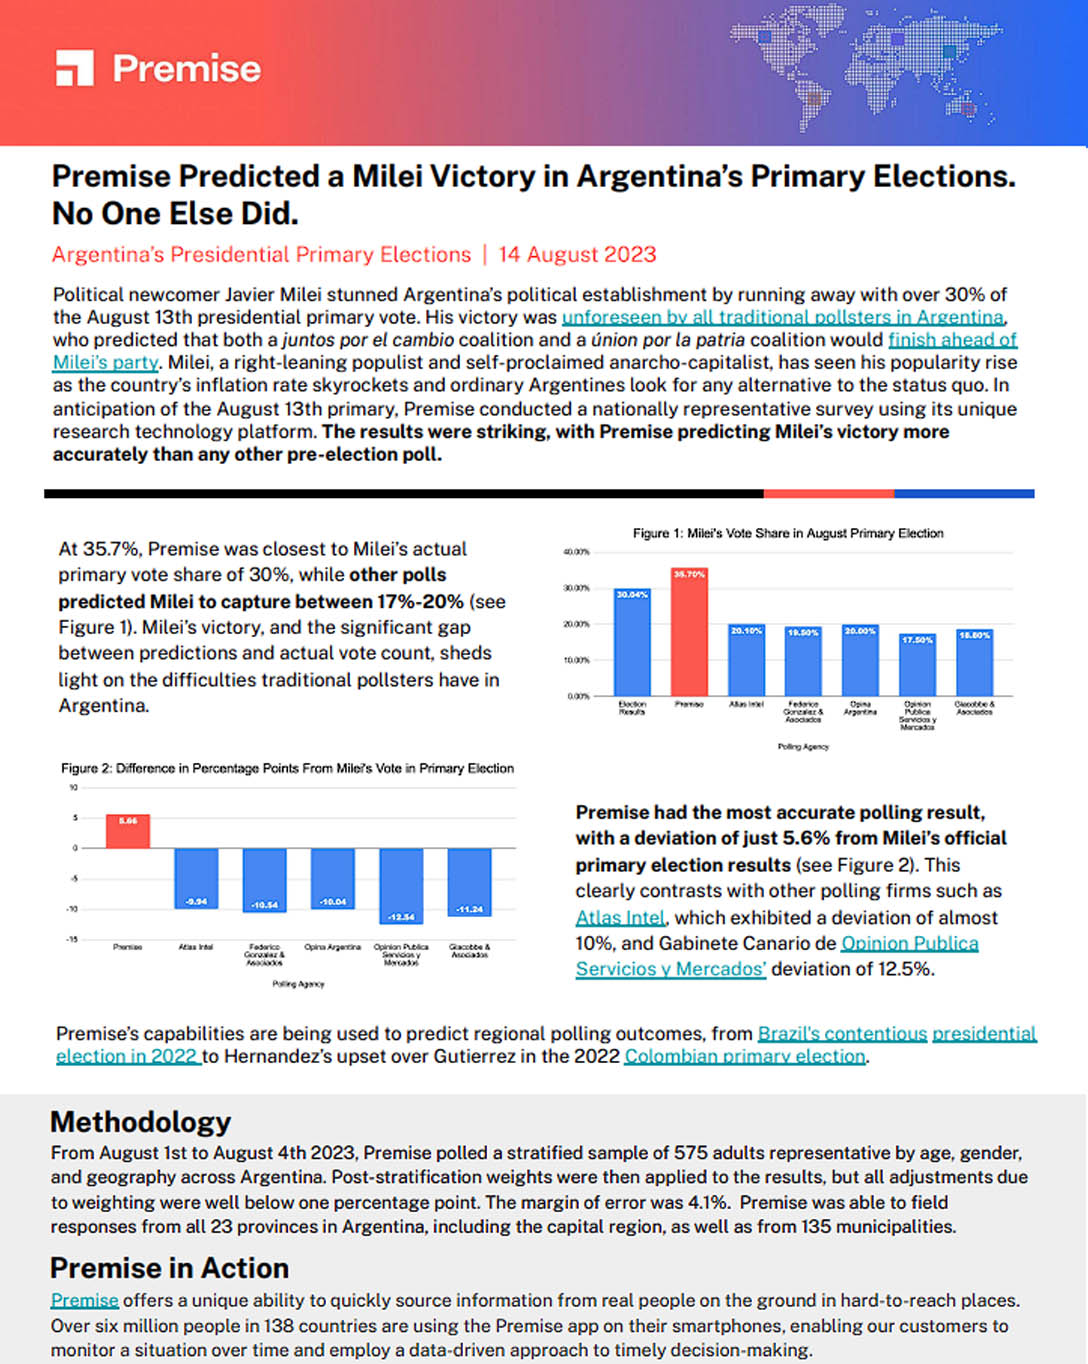 Premise Predicted a Milei Victory in Argentina’s Primary Elections. No One Else Did